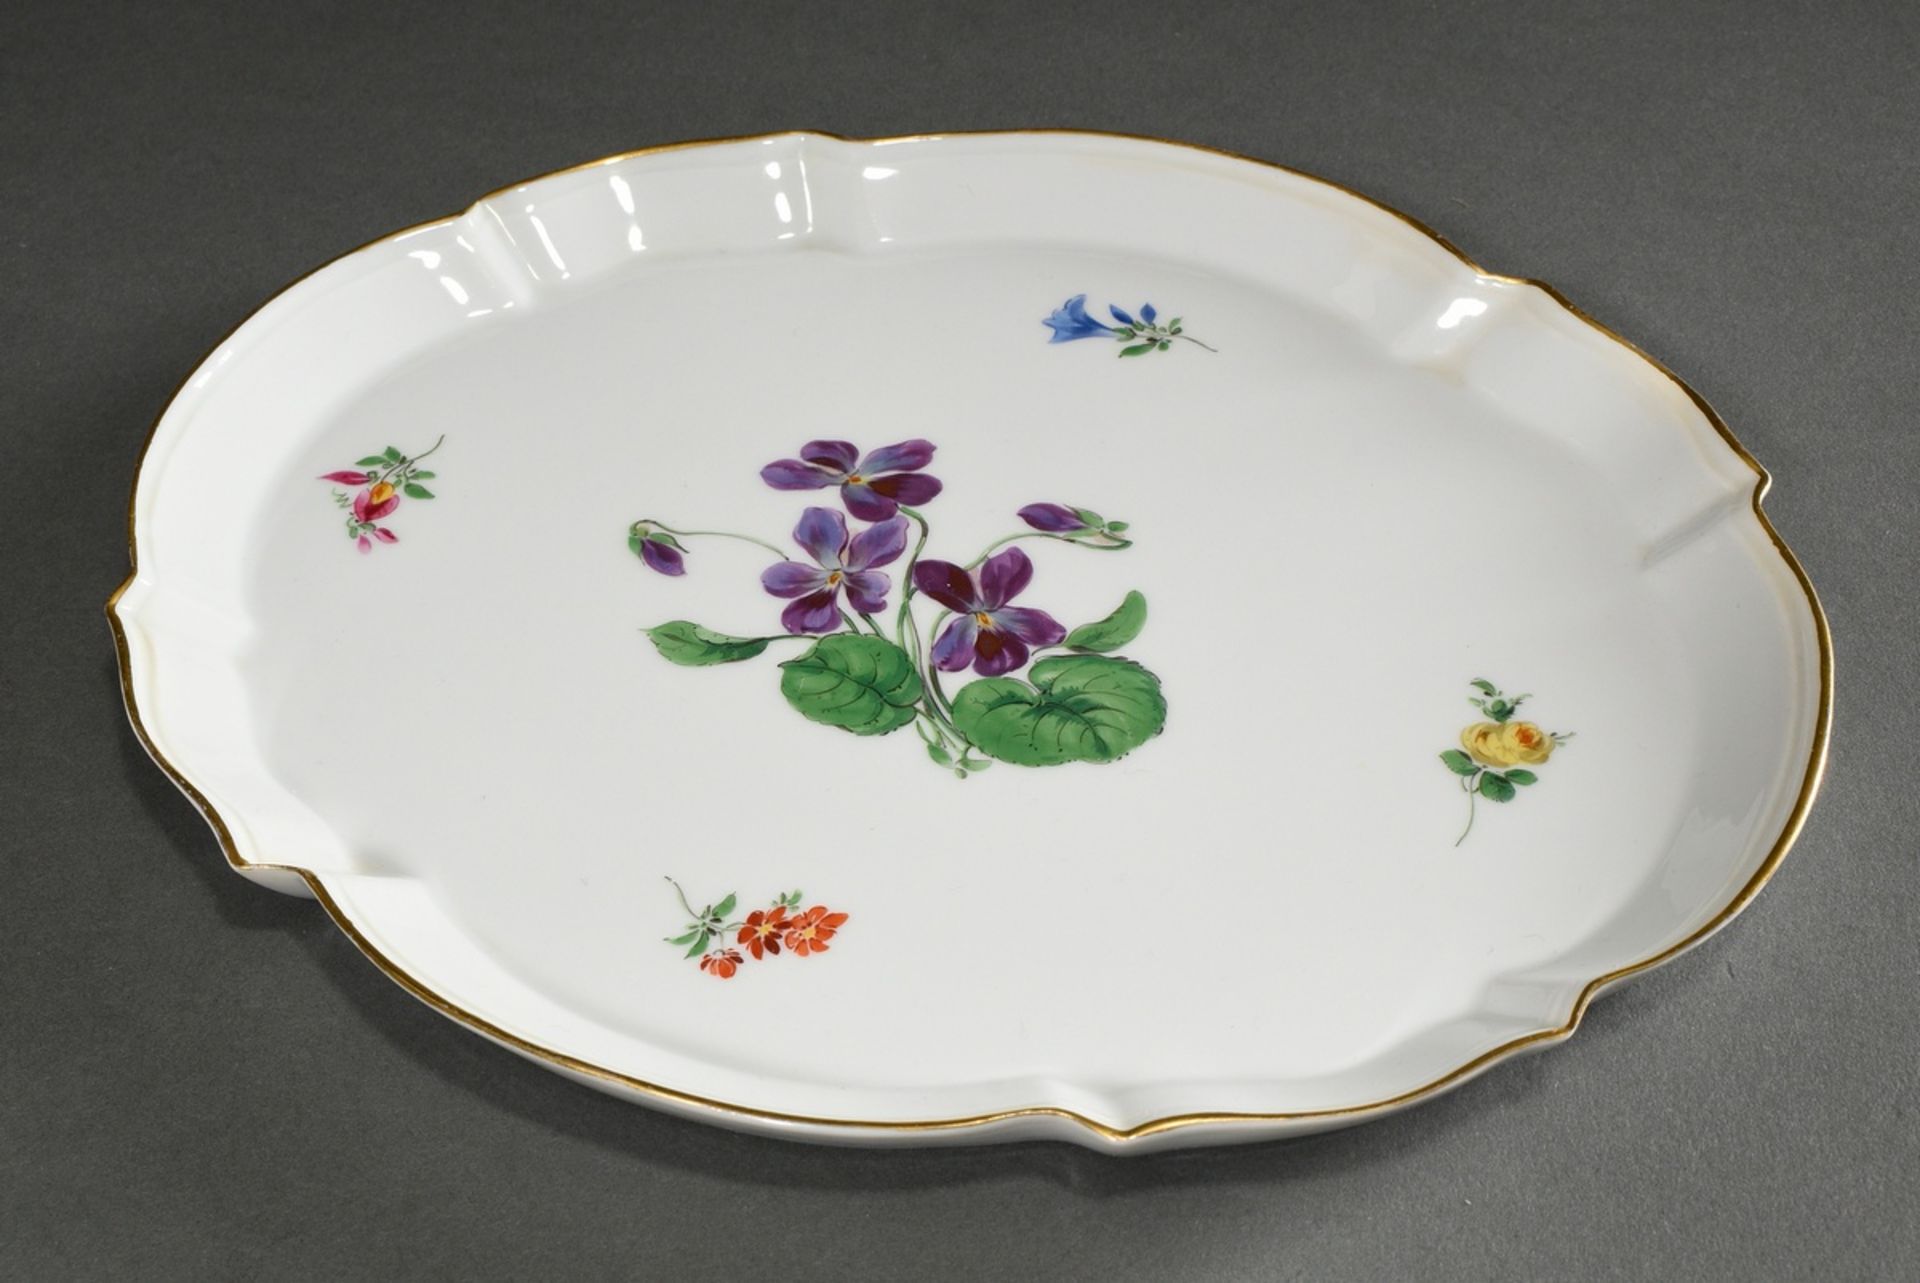 11 Various pieces Meissen "German Flower" with gold staffage and yellow rim (war painting), 1924-19 - Image 4 of 6